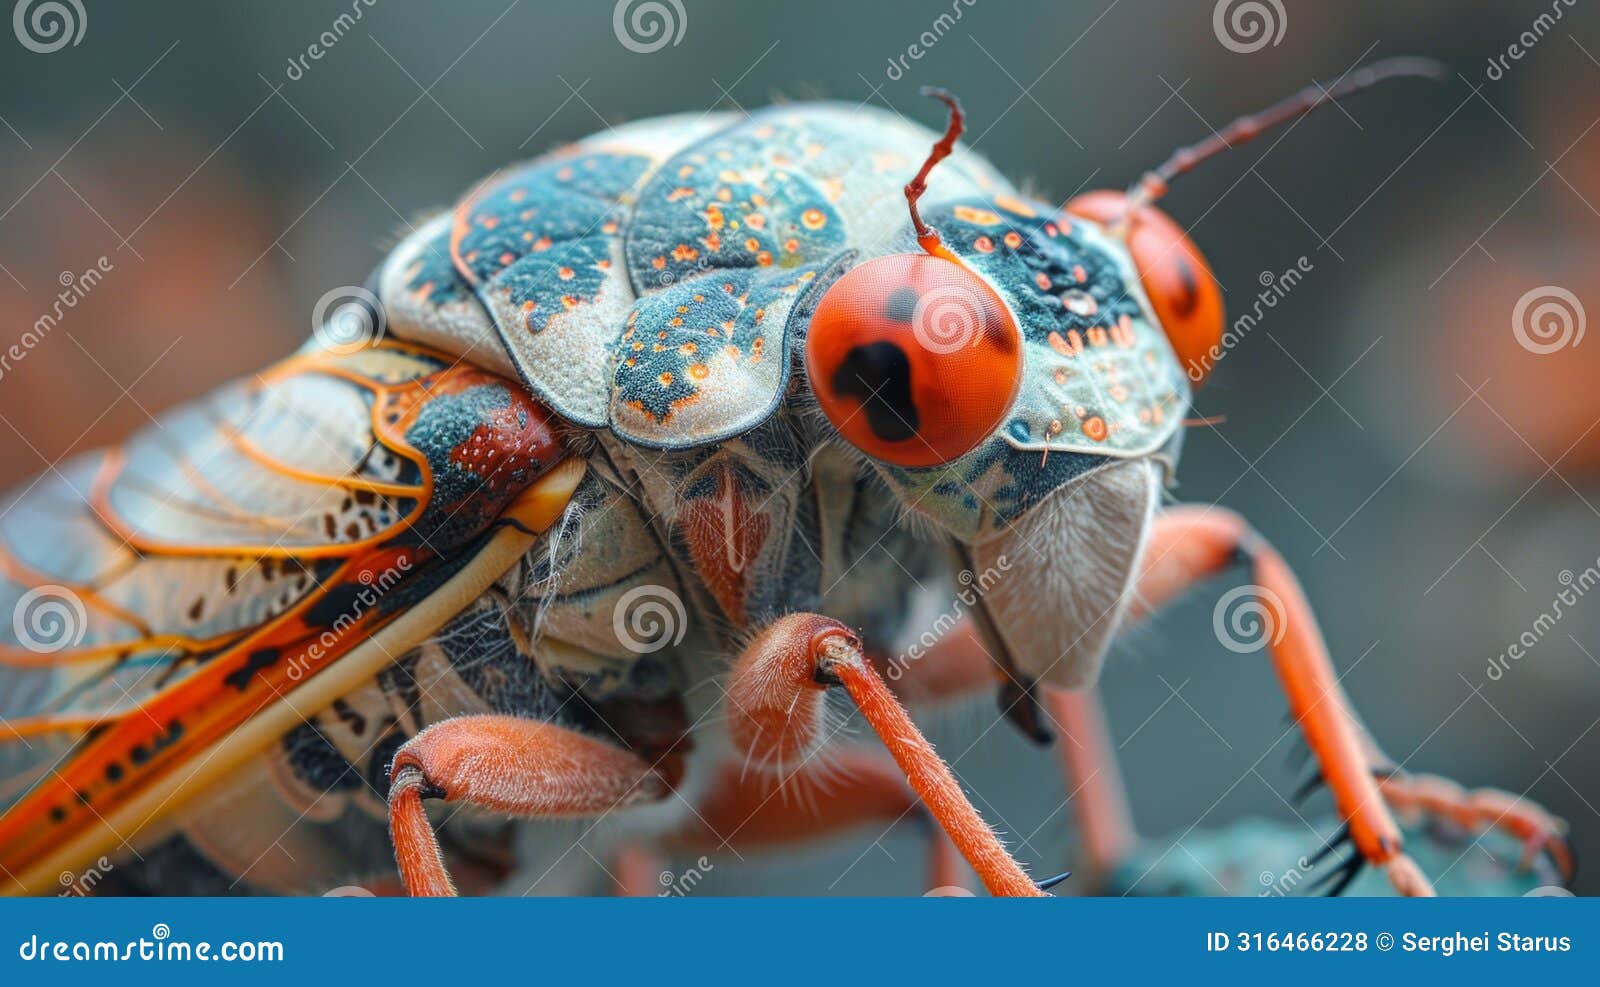 a close up of a bug with bright orange eyes and red antennae, ai